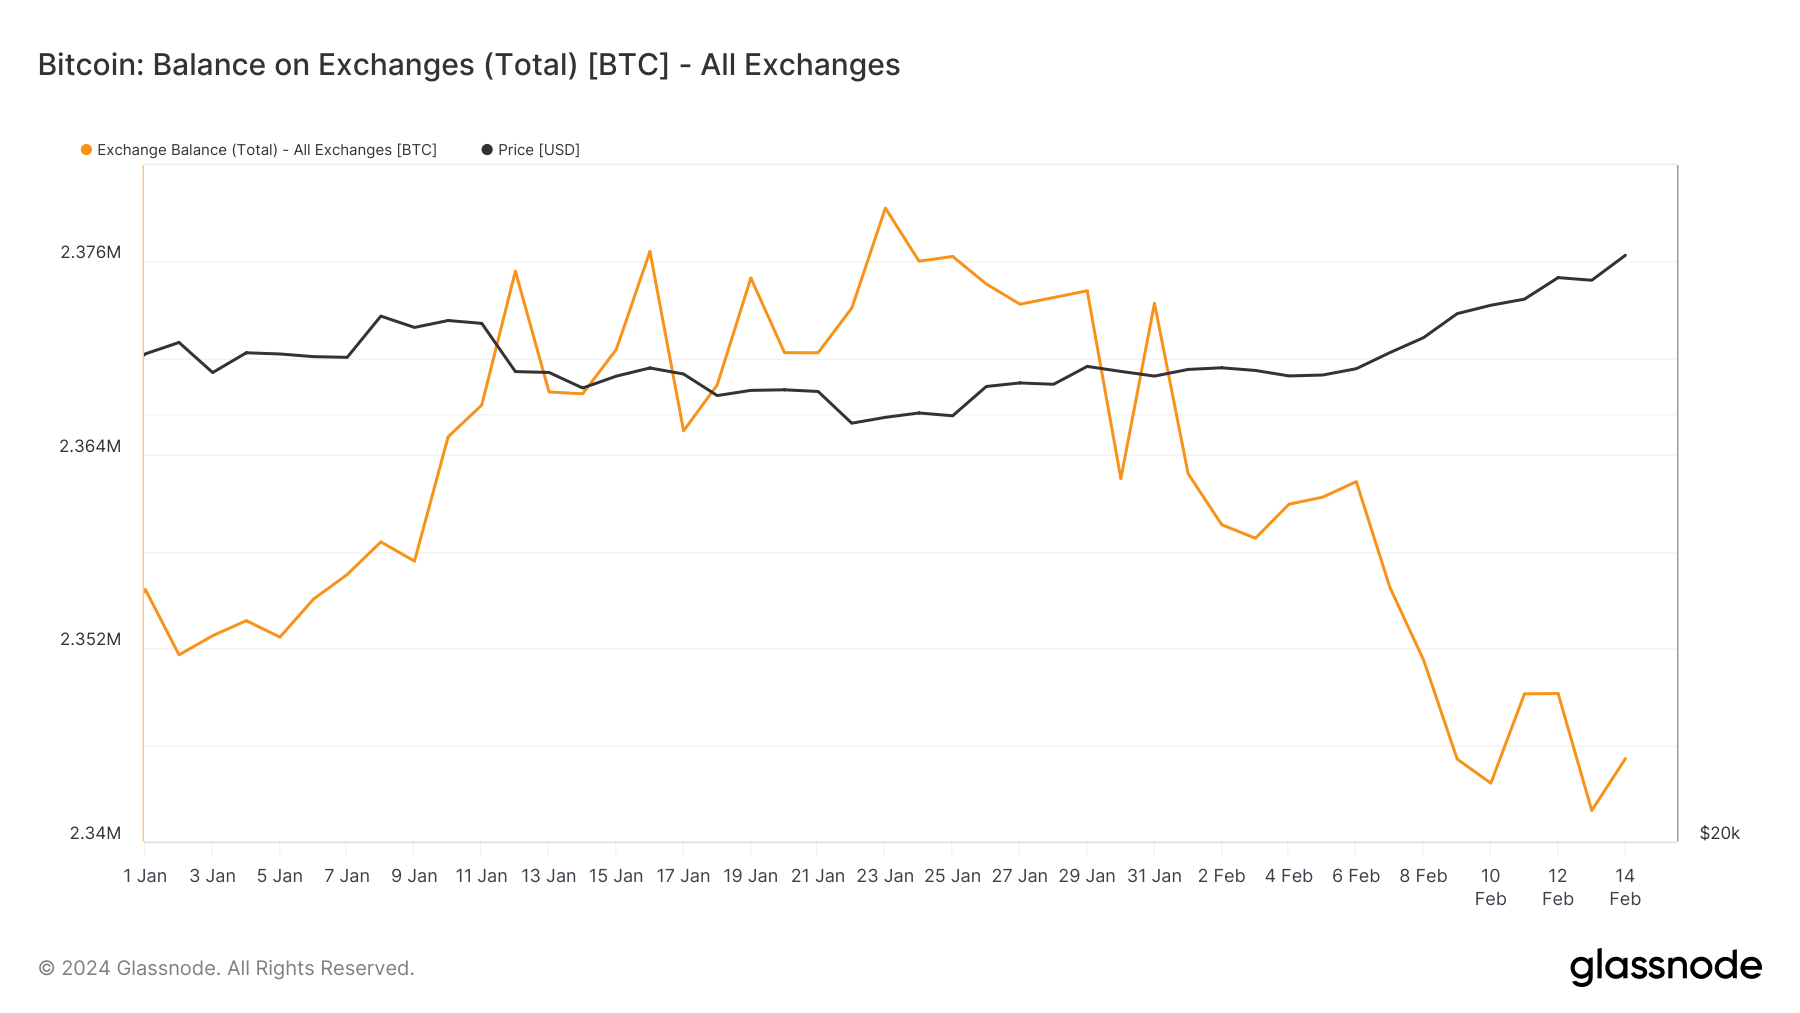 bitcoin exchange balance since the beginning of the year